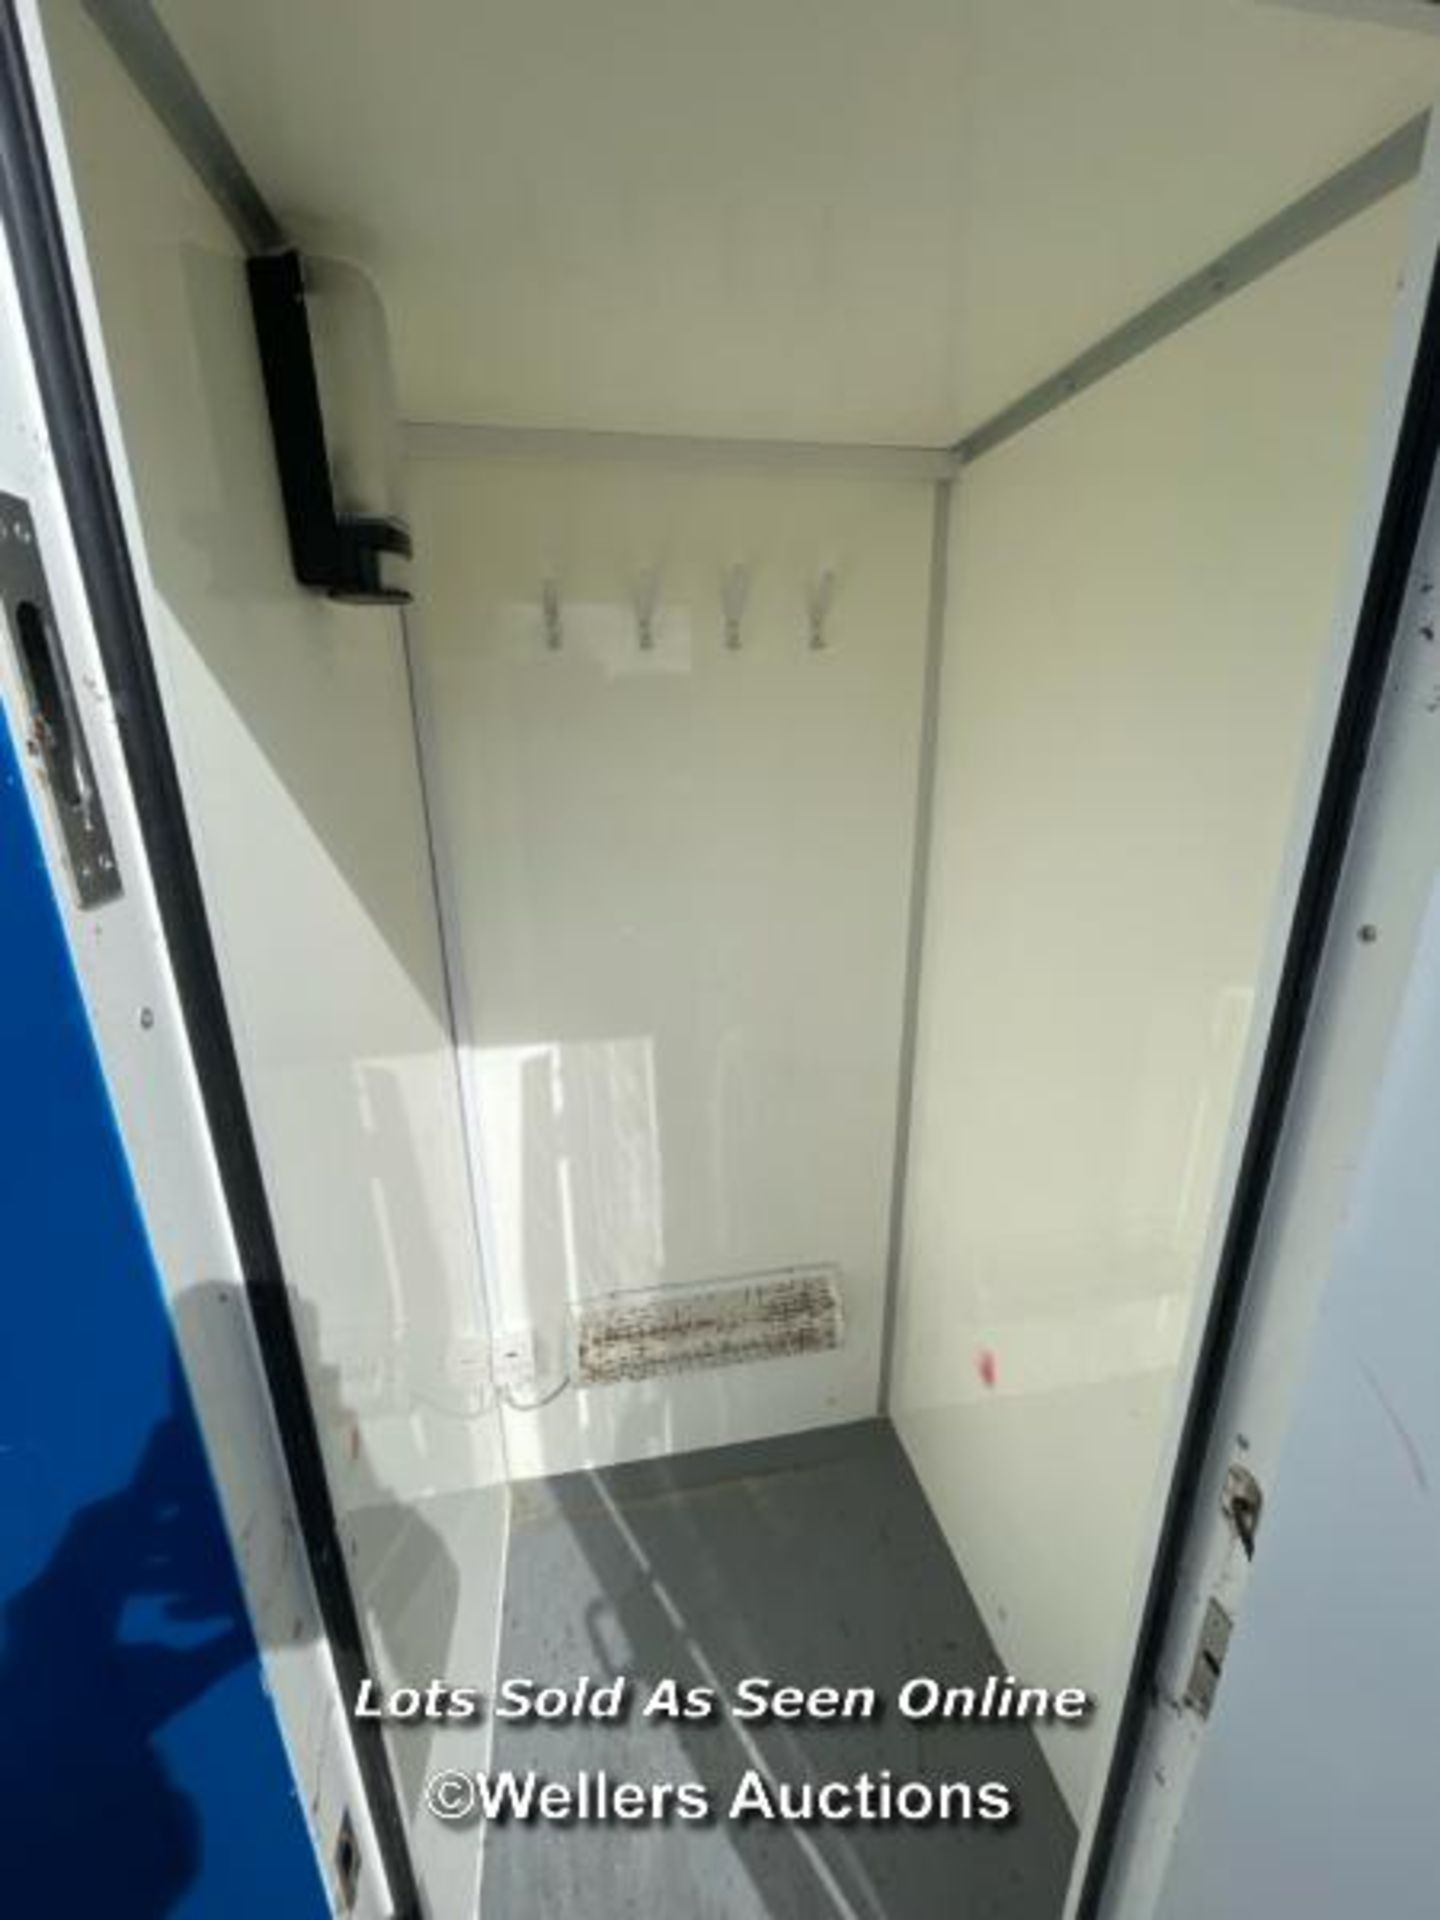 6 PERSON 12 X 7.5FT AJC EASY CABIN TOWABLE WELFARE UNIT, INCLUDES WASH BASIN, KETTLE, MICROWAVE, - Image 13 of 18